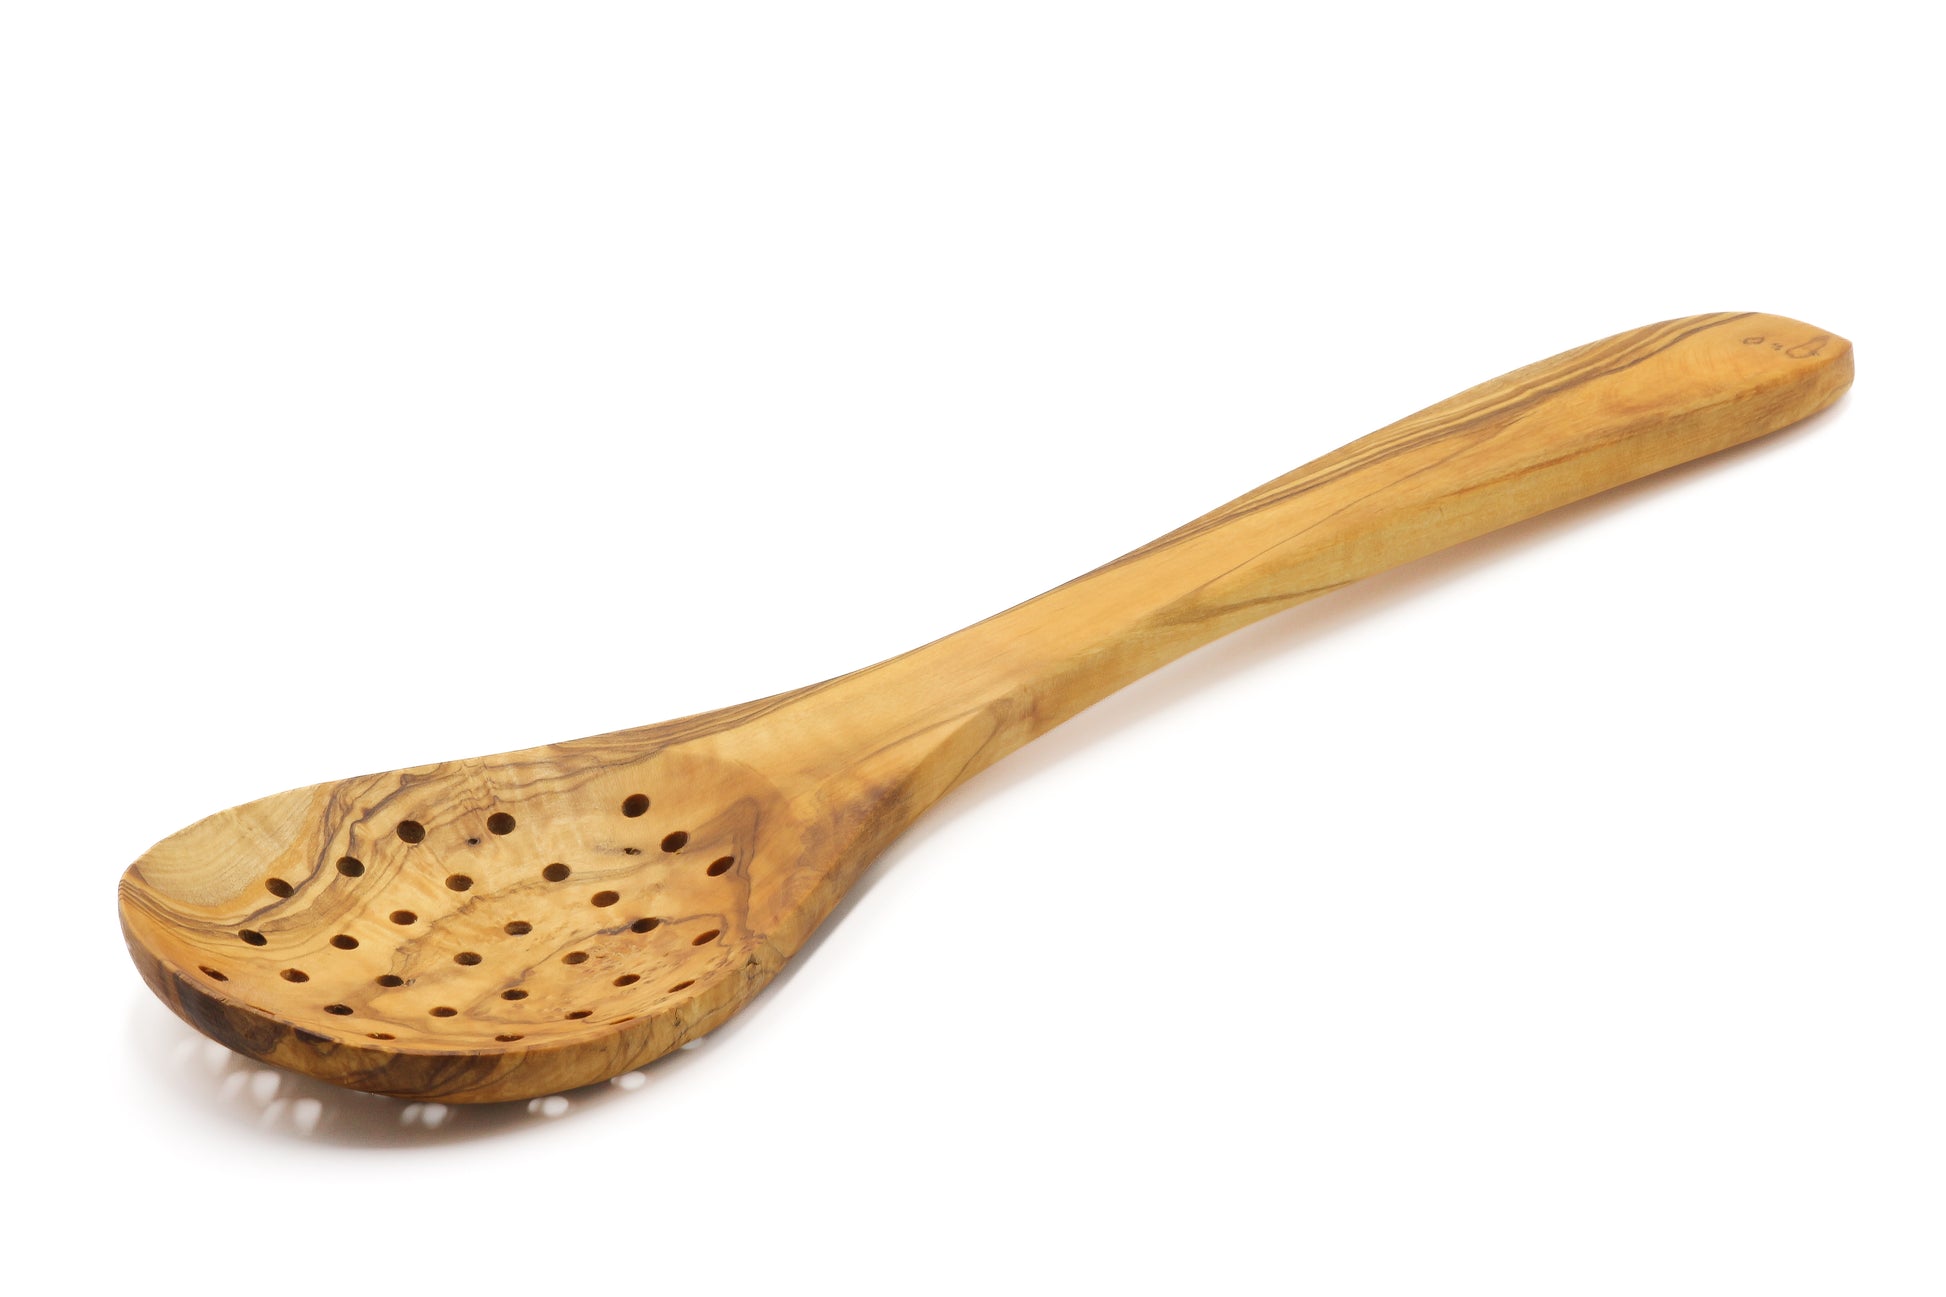 Olive wood strainer, skimming ladle, and serving spoon